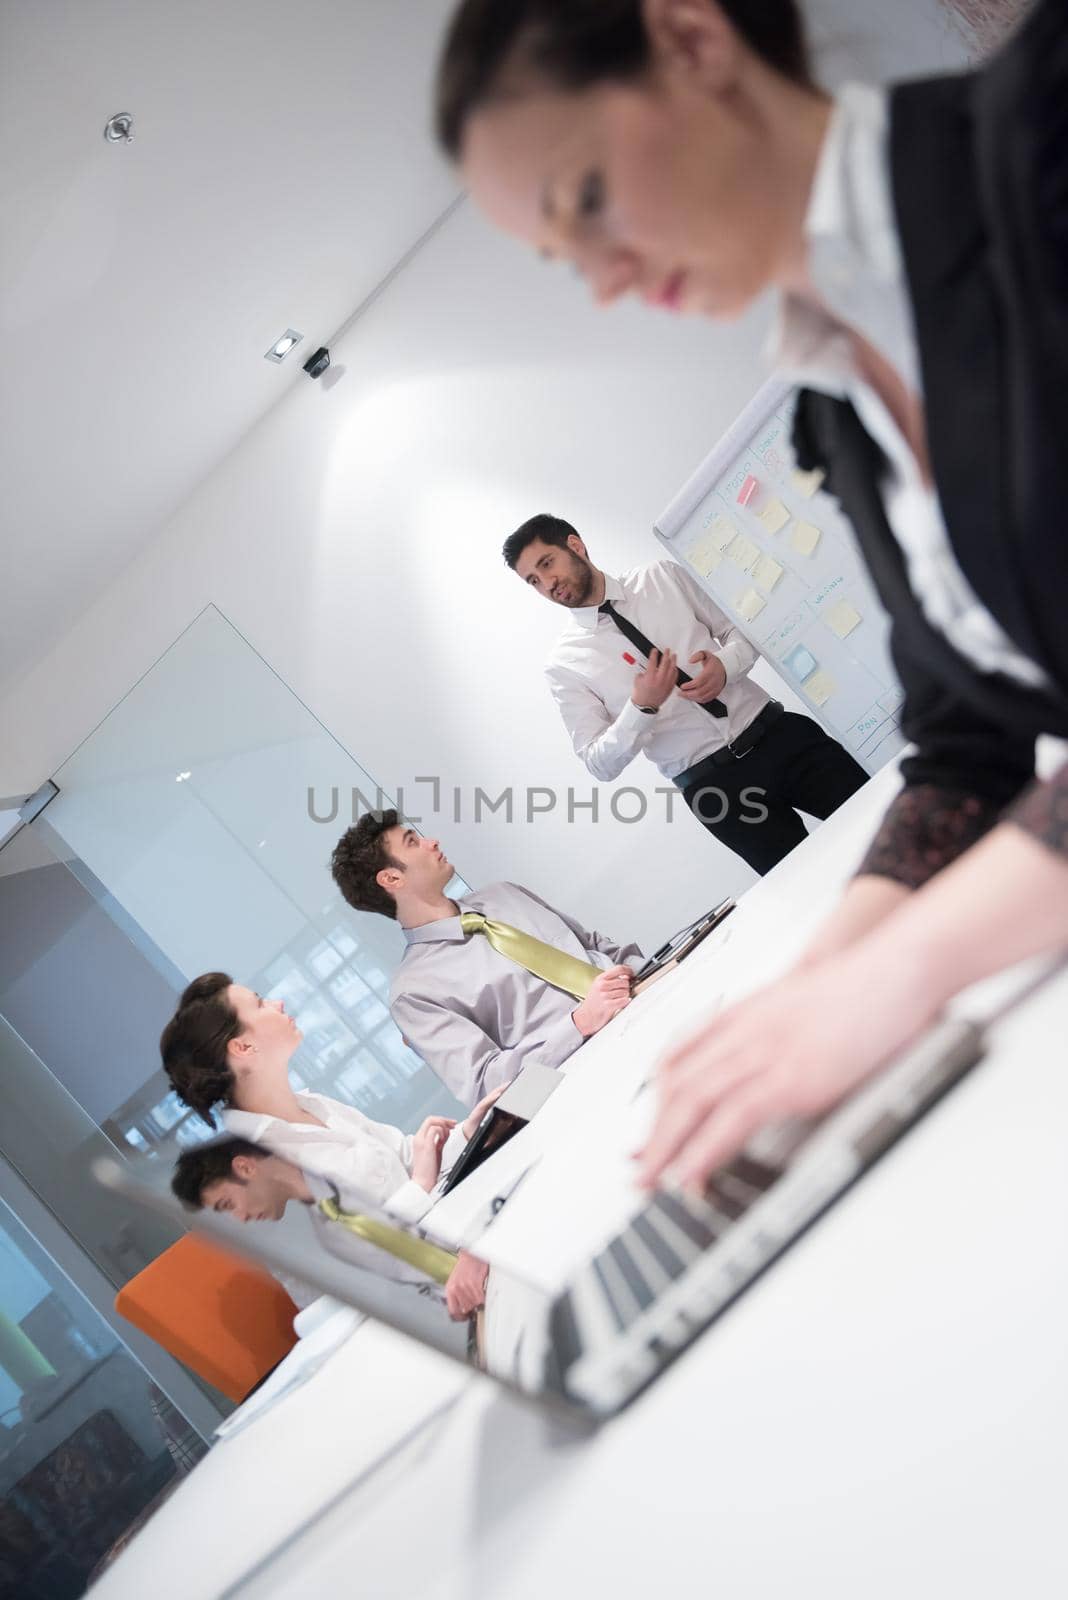 young business woman on meeting usineg laptop computer, blured group of people in background at  modern bright startup office interior taking notes on white flip board and brainstorming about plans and ideas